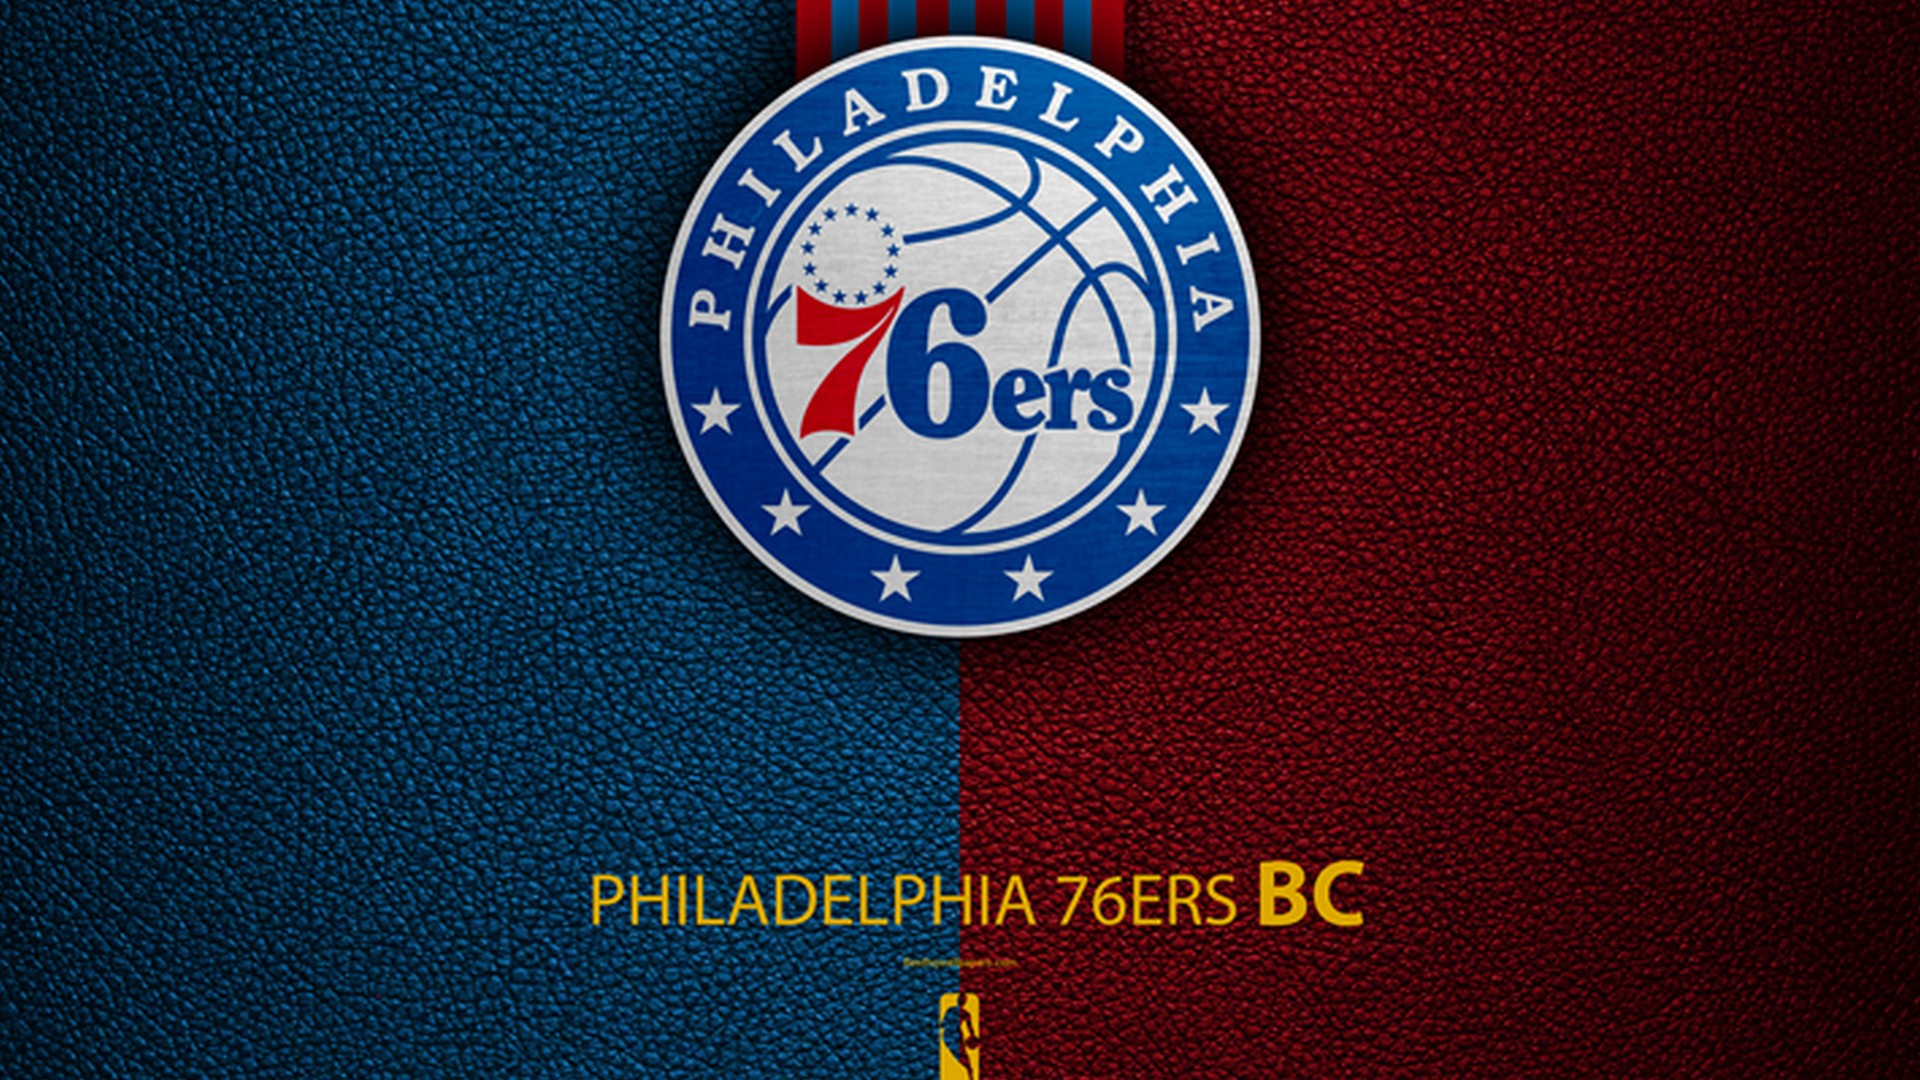 Wallpapers Philadelphia 76ers With high-resolution 1920X1080 pixel. You can use this wallpaper for your Desktop Computer Backgrounds, Windows or Mac Screensavers, iPhone Lock screen, Tablet or Android and another Mobile Phone device